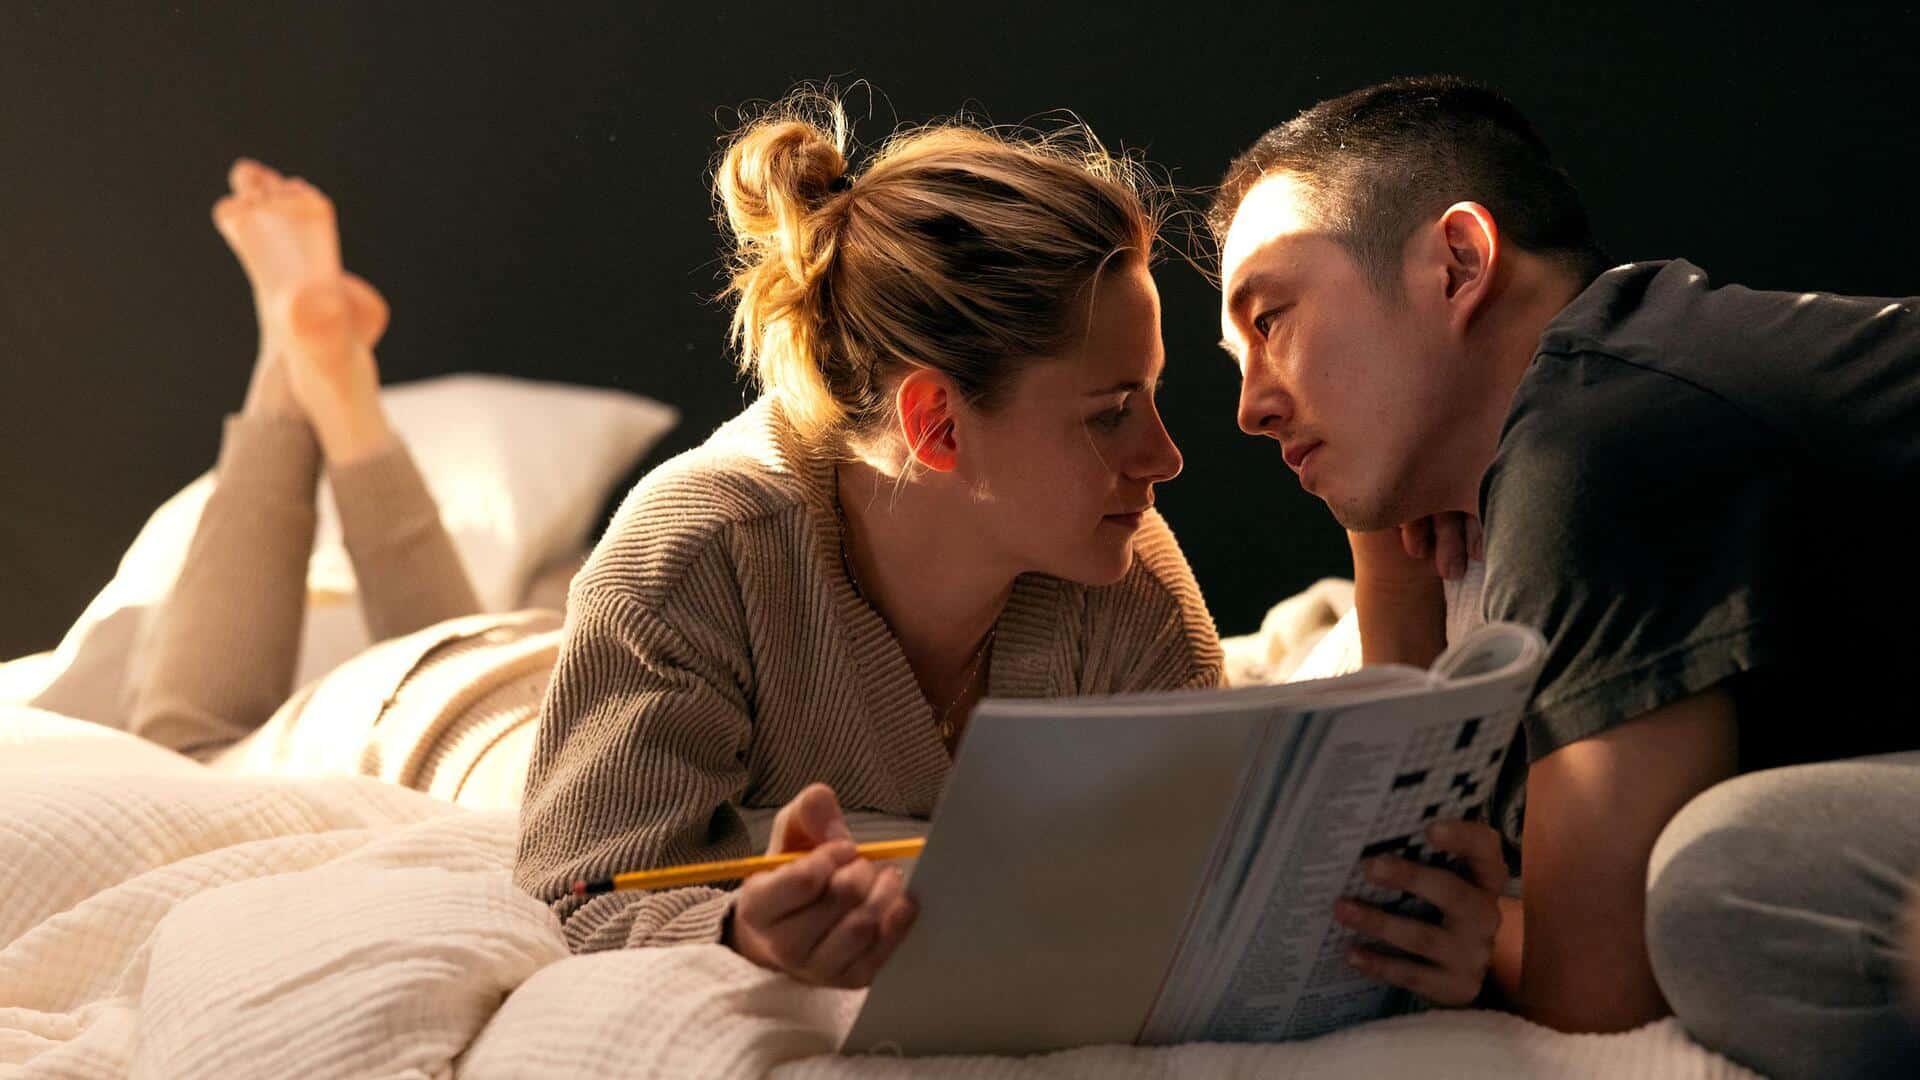  A woman and man about to kiss while doing a crossword in this photo from AgX.